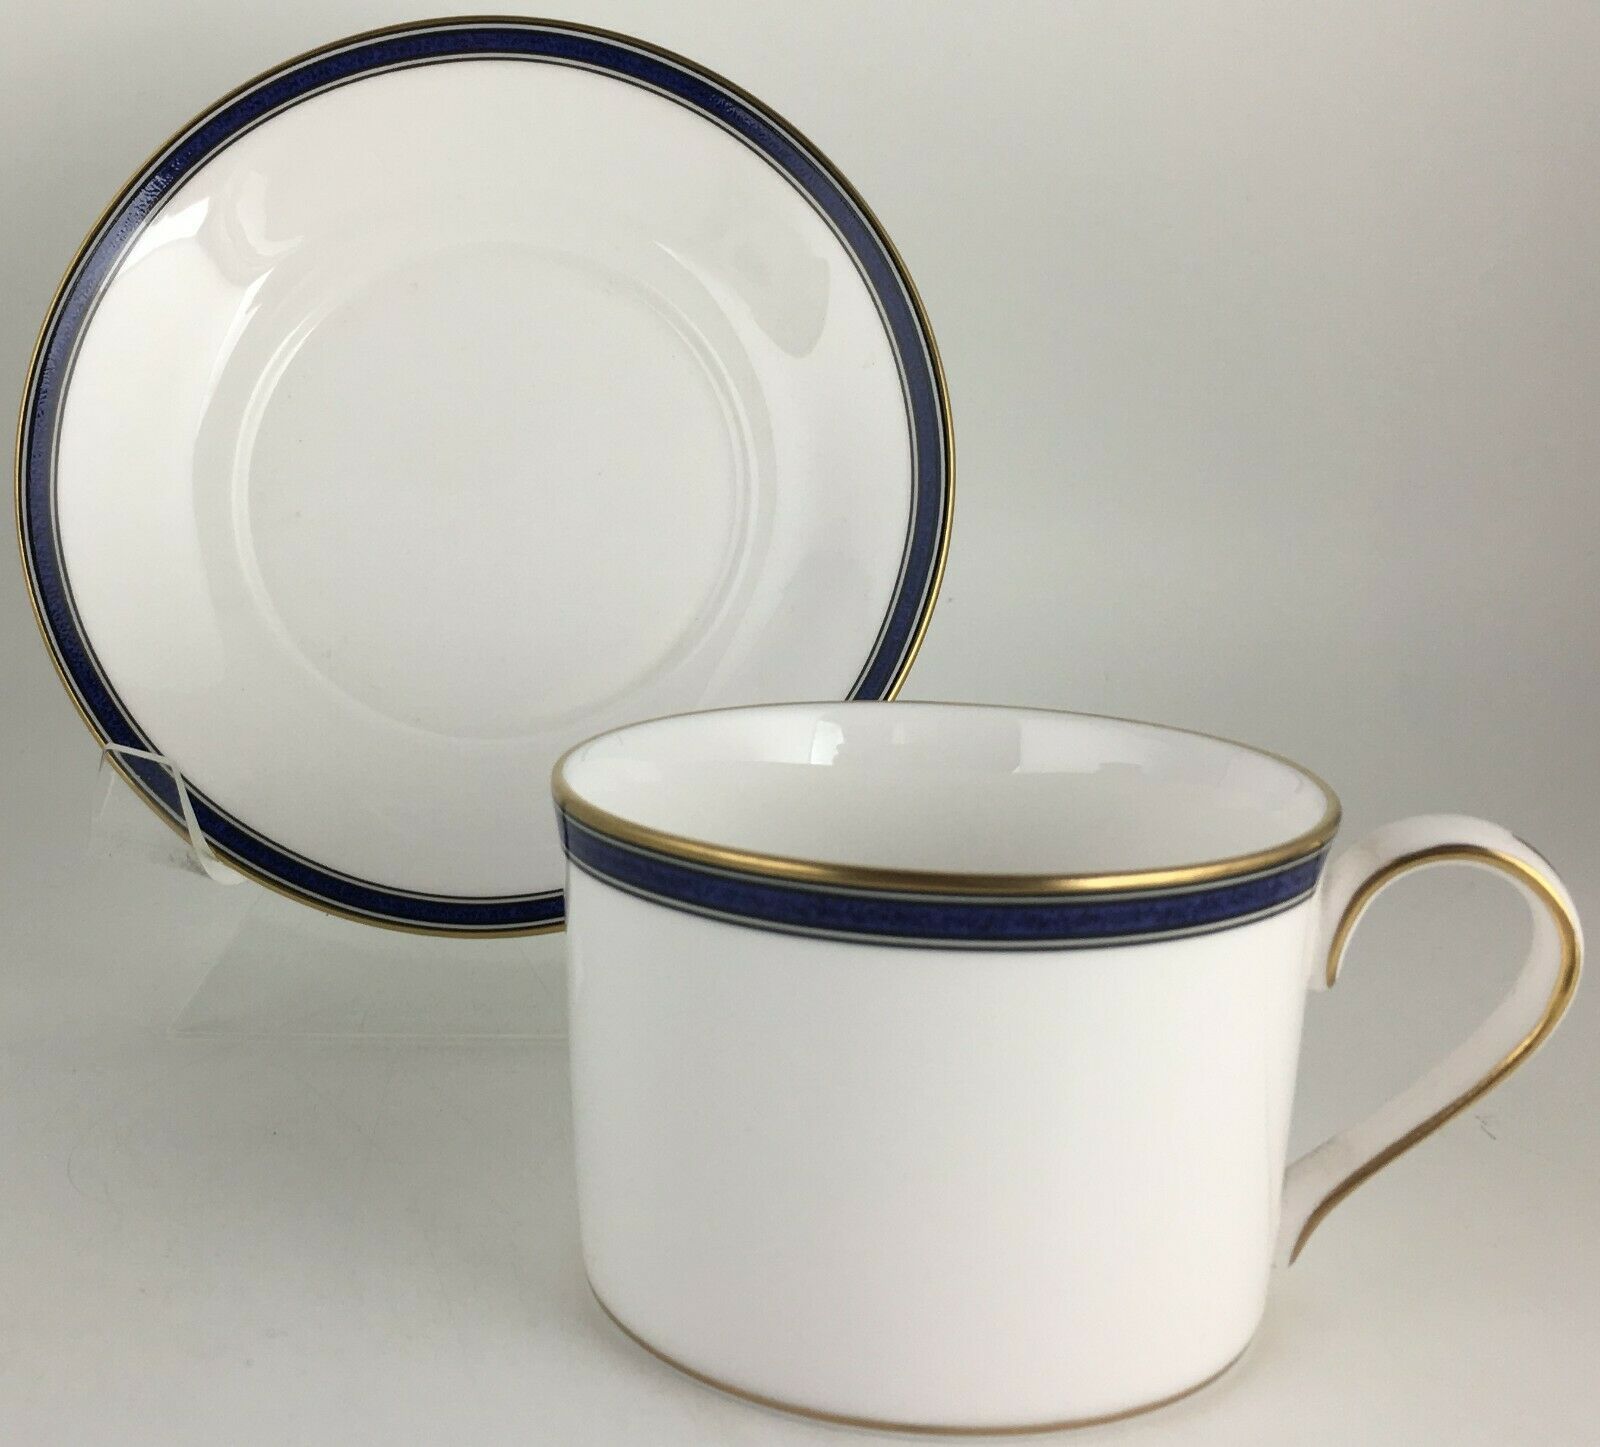 Primary image for Spode Lausanne Y8579-S Cup & Saucer